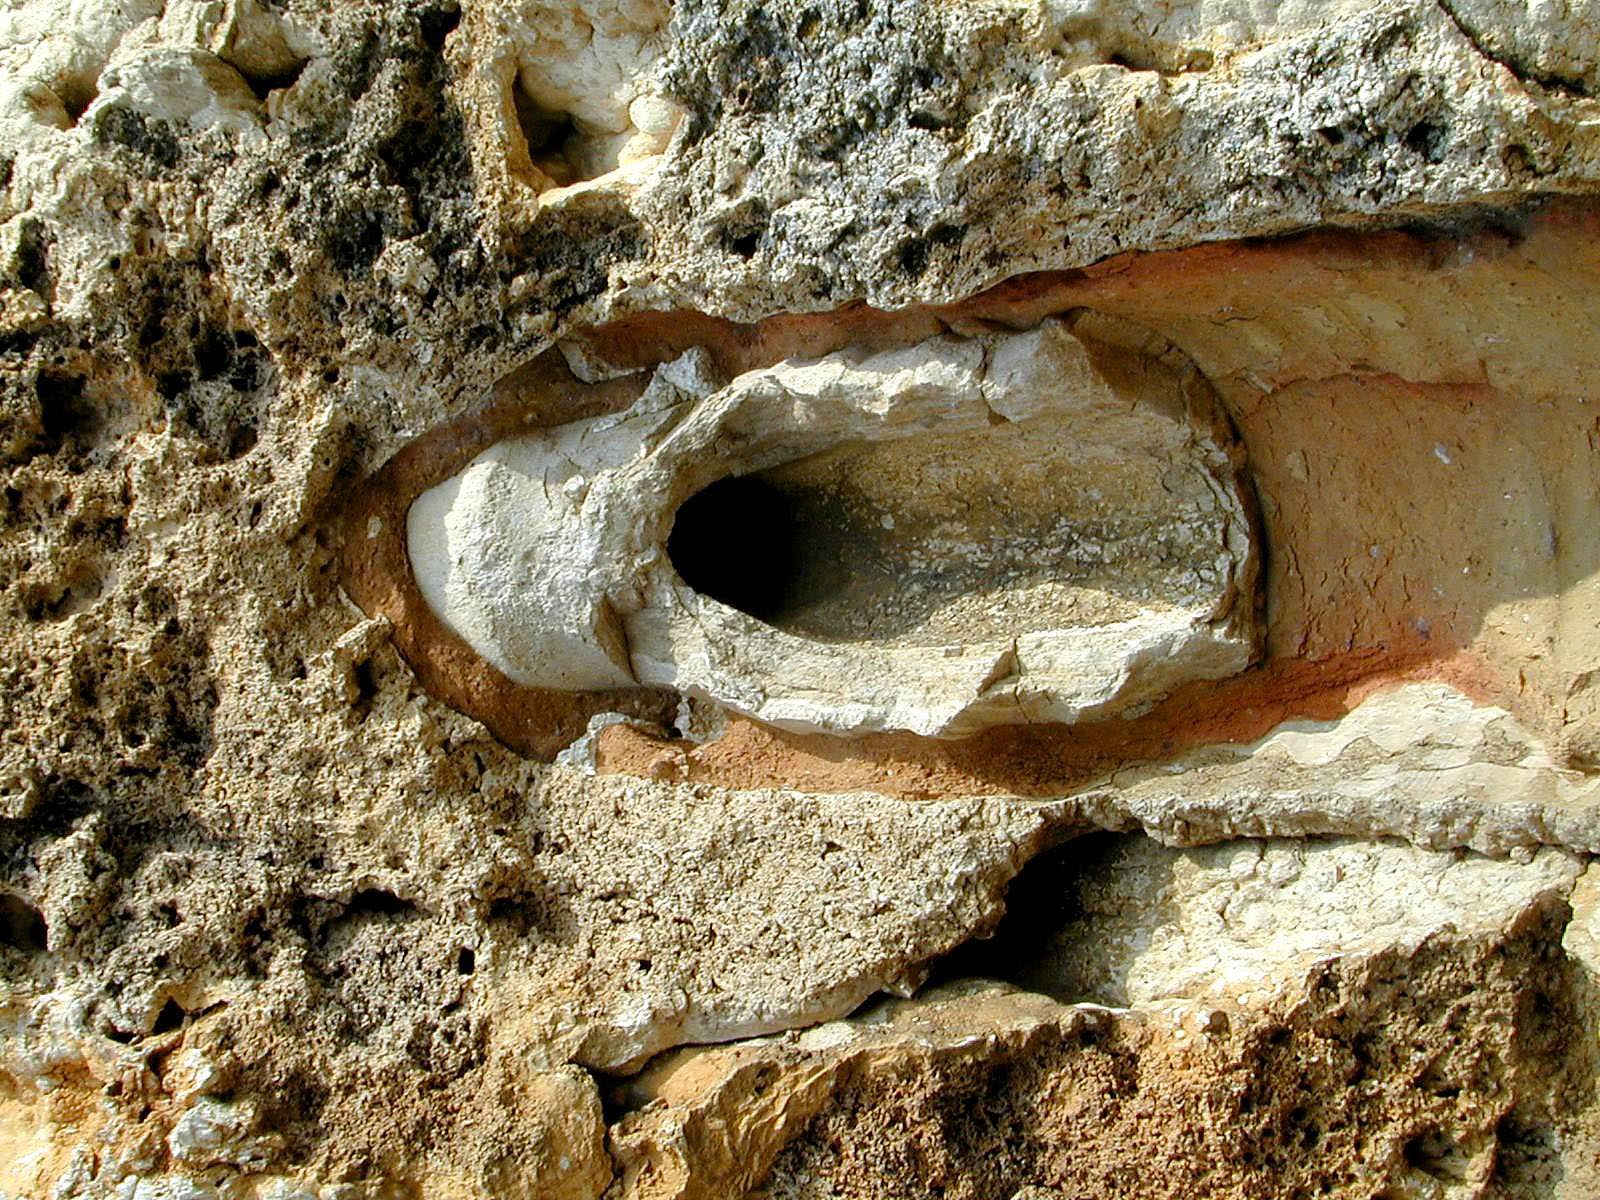 Laodicea pipe with calcium, showing how the water would become lukewarm before reaching Laodicea